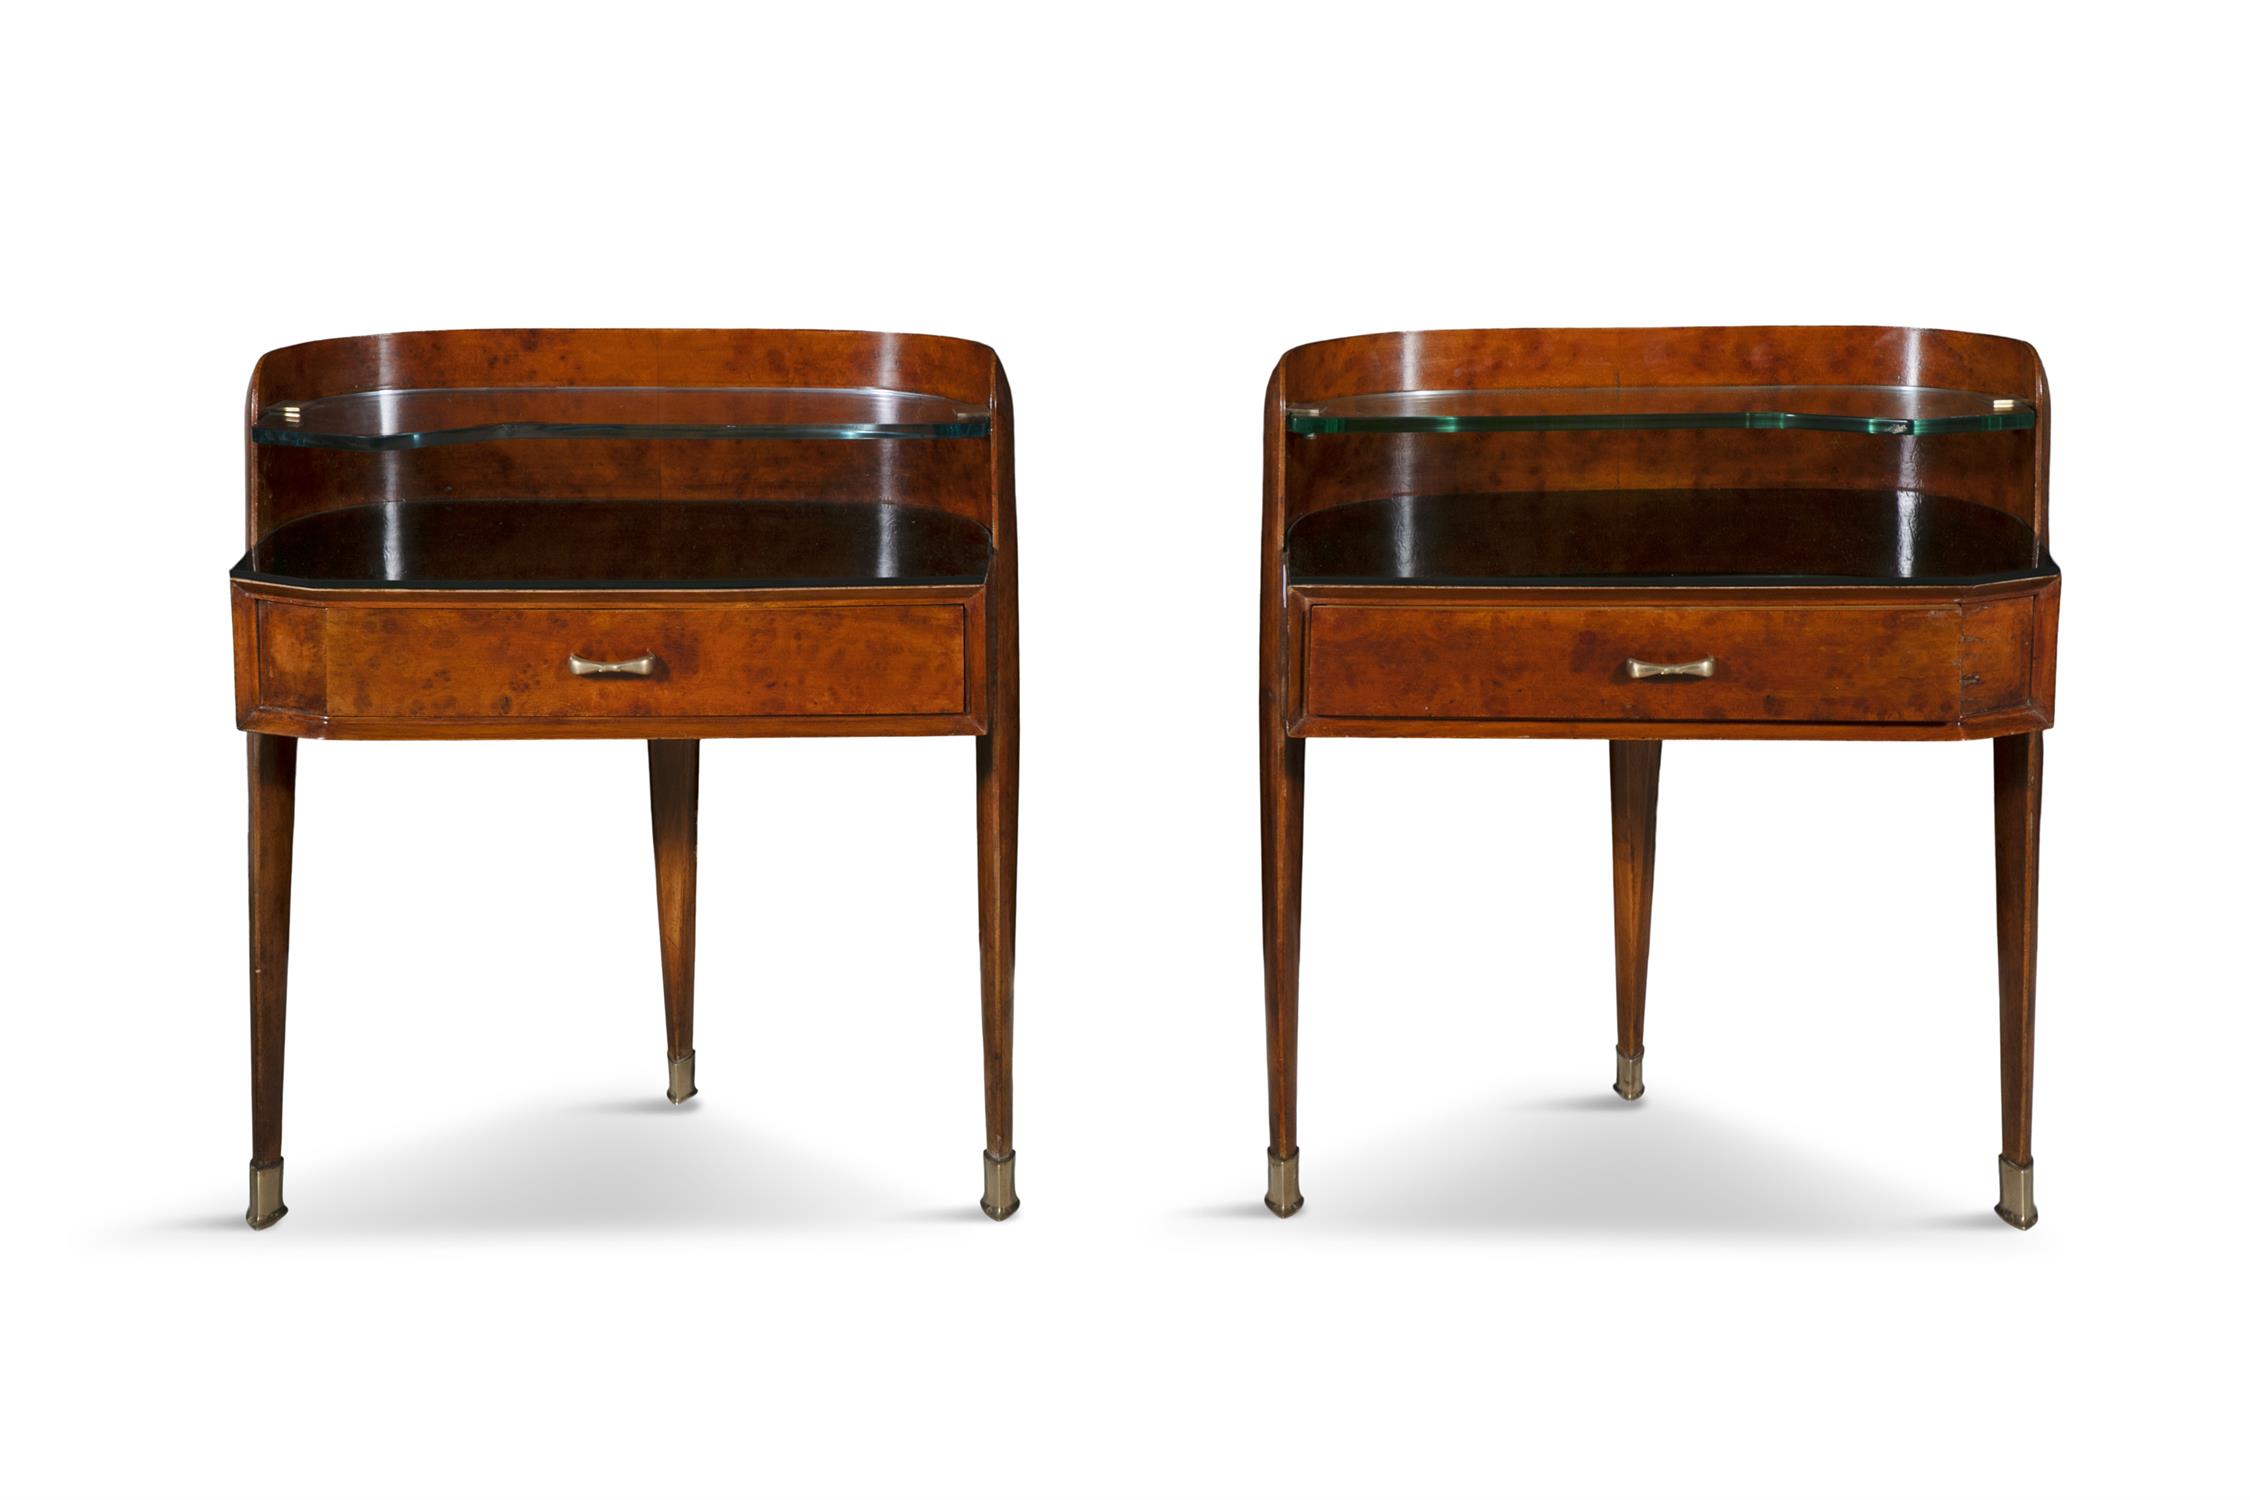 BEDSIDE TABLES A pair of burr walnut and glass bedside tables. Italy, c.1960. 55 x 27.5 x 60cm(h) - Image 2 of 6